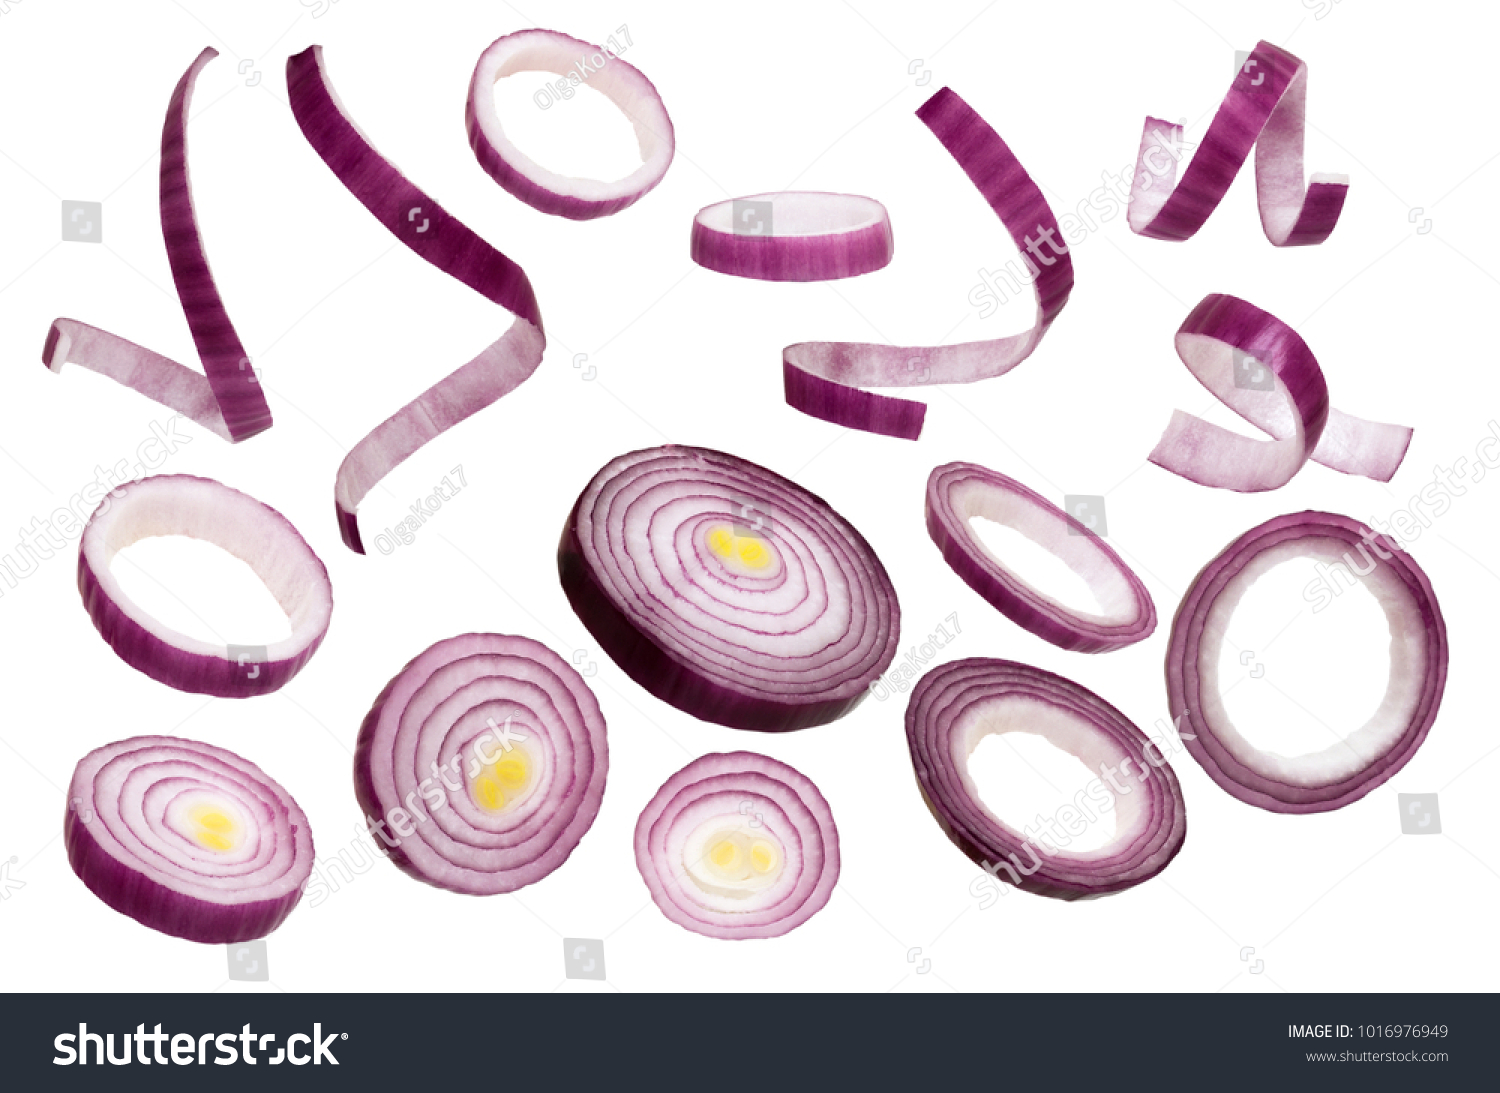 Sliced red onion isolated on white background. Set of red onion slices isolated on a white background.  Closeup #1016976949